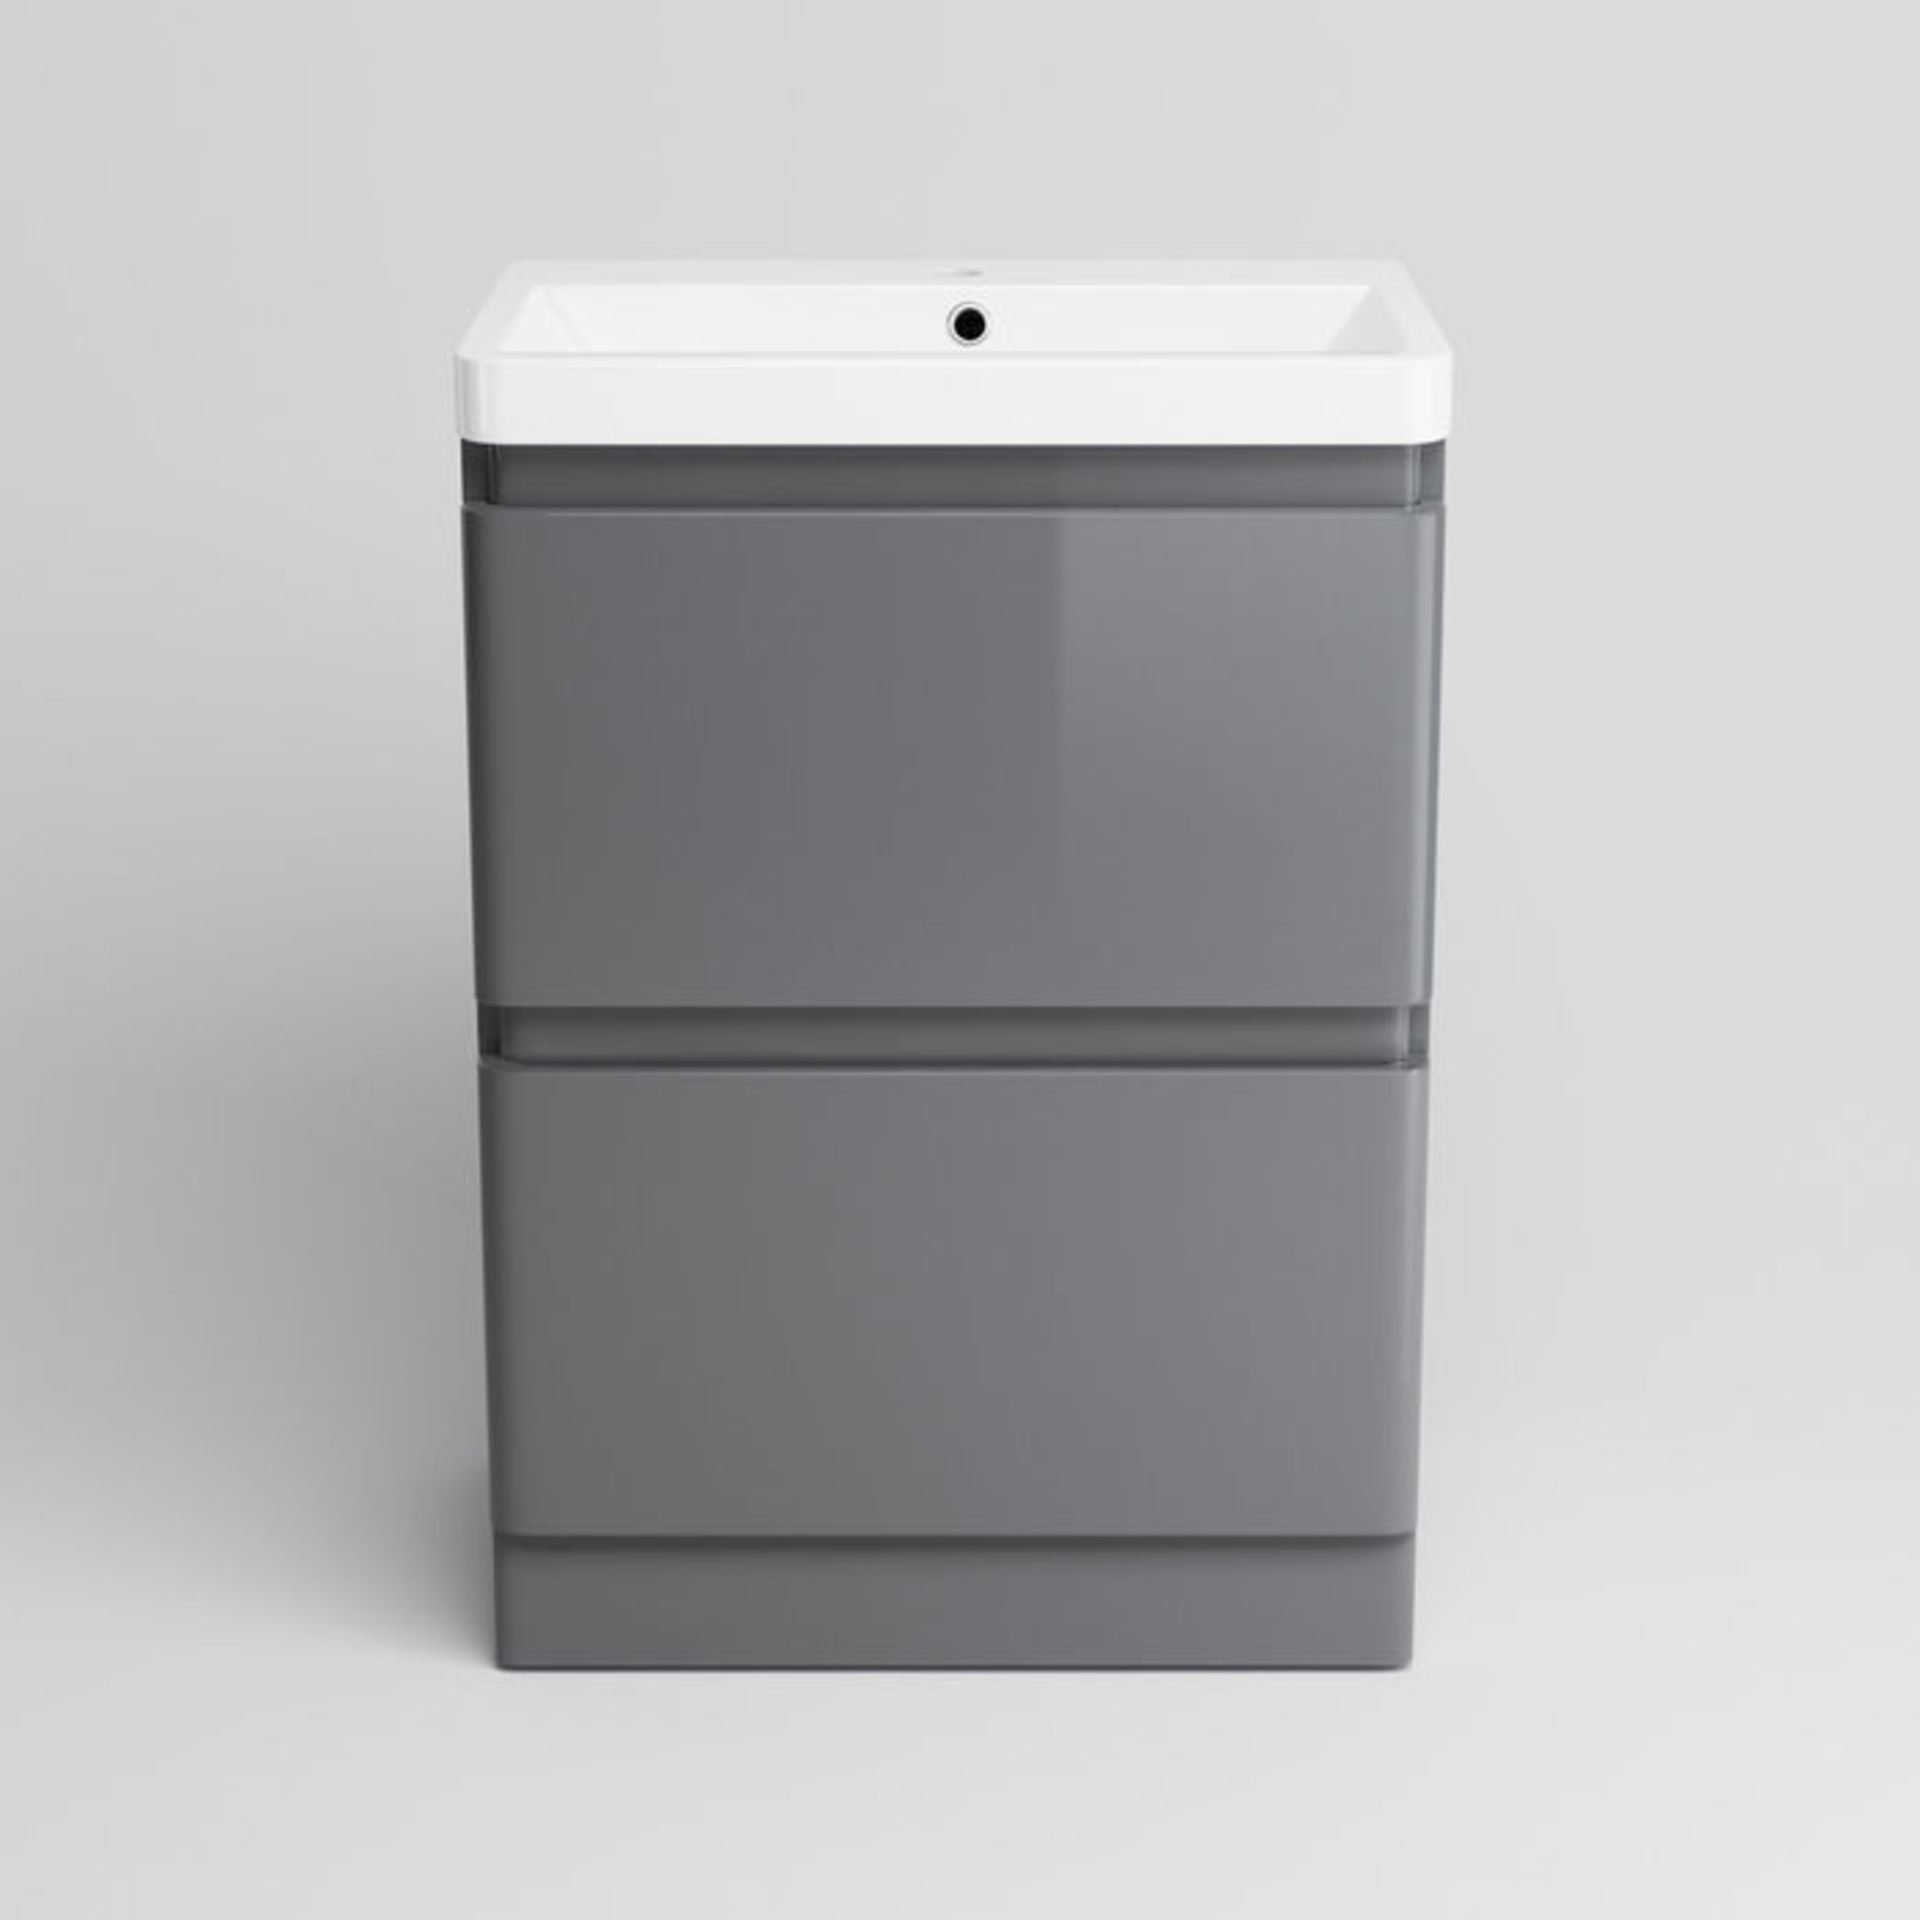 (KL301) 600mm Denver Gloss Grey Drawer Unit - Floor Standing. . Does NOT include basin. We love this - Image 5 of 5